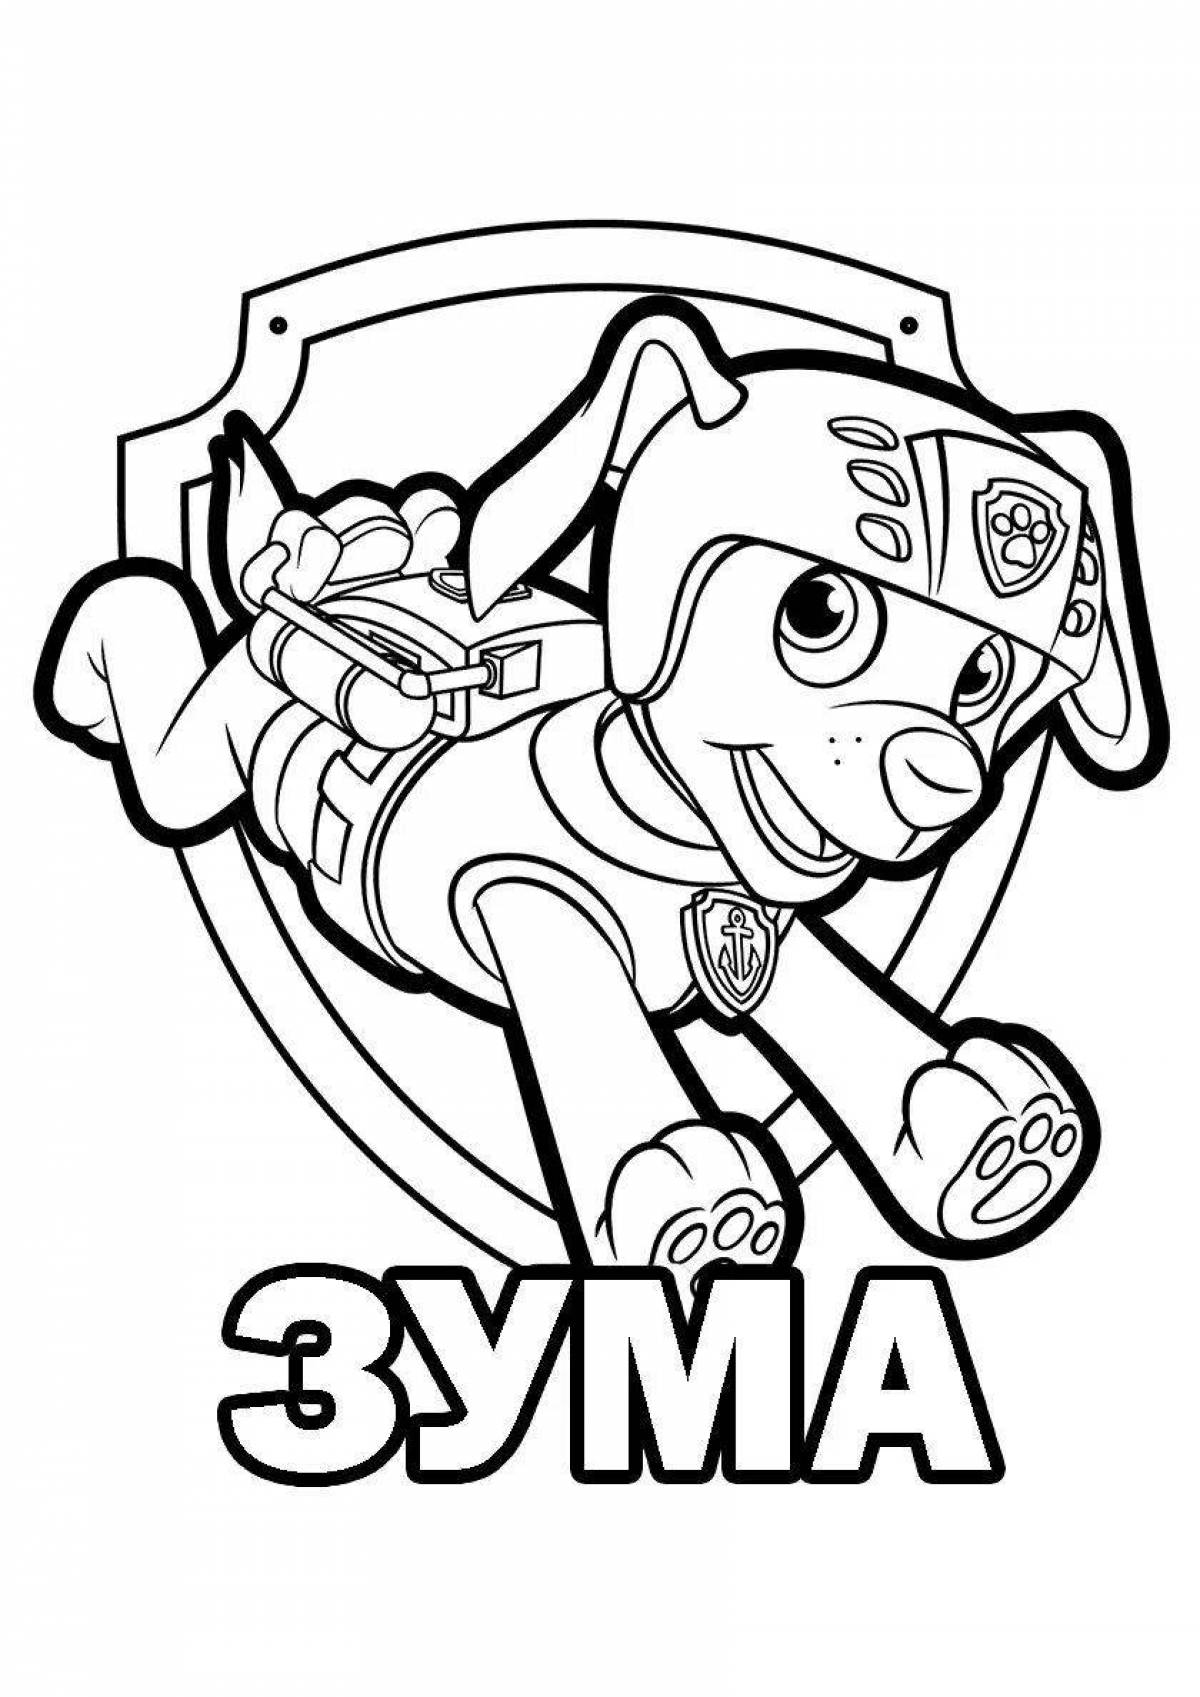 Fantastic paw patrol coloring page for boys